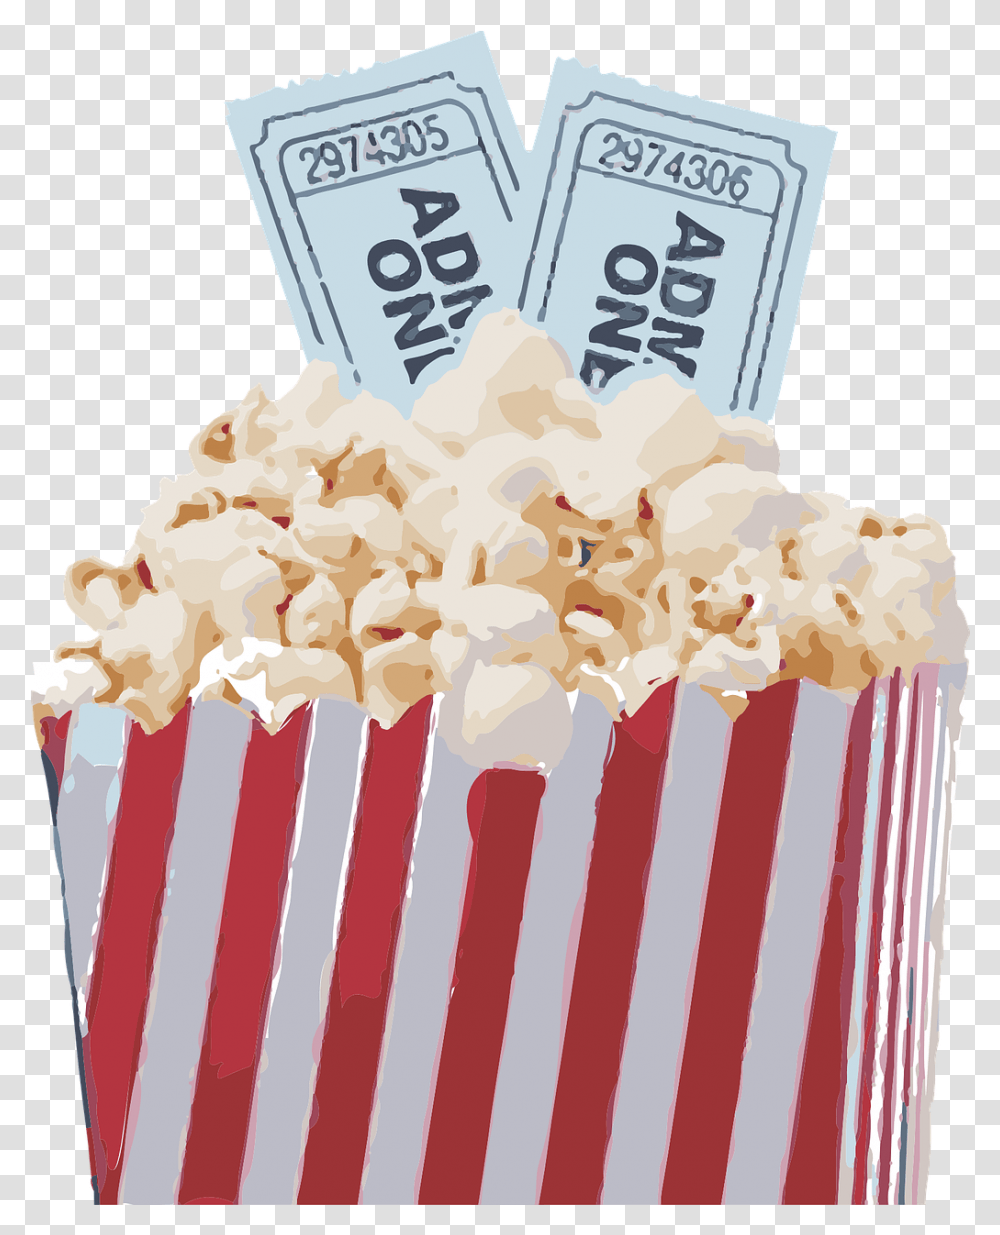 Teps Movie Night Under The Stars The Entrance Public School Popcorn Time And Netflix, Food, Snack, Birthday Cake, Dessert Transparent Png